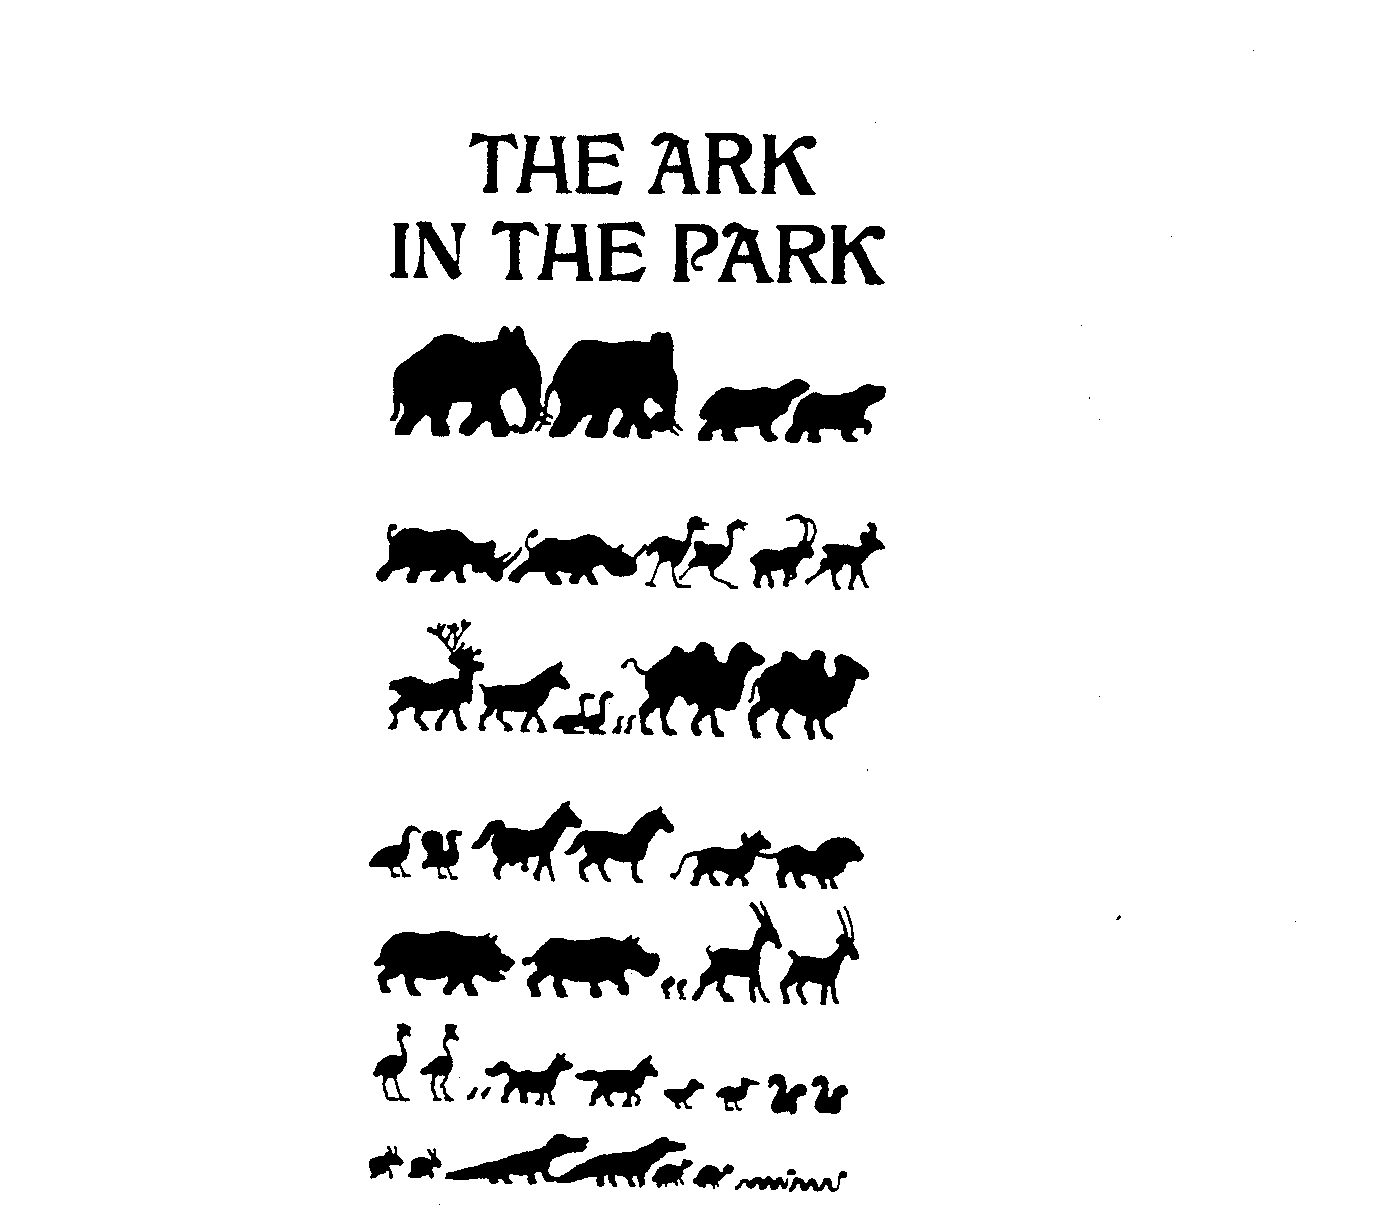  THE ARK IN THE PARK